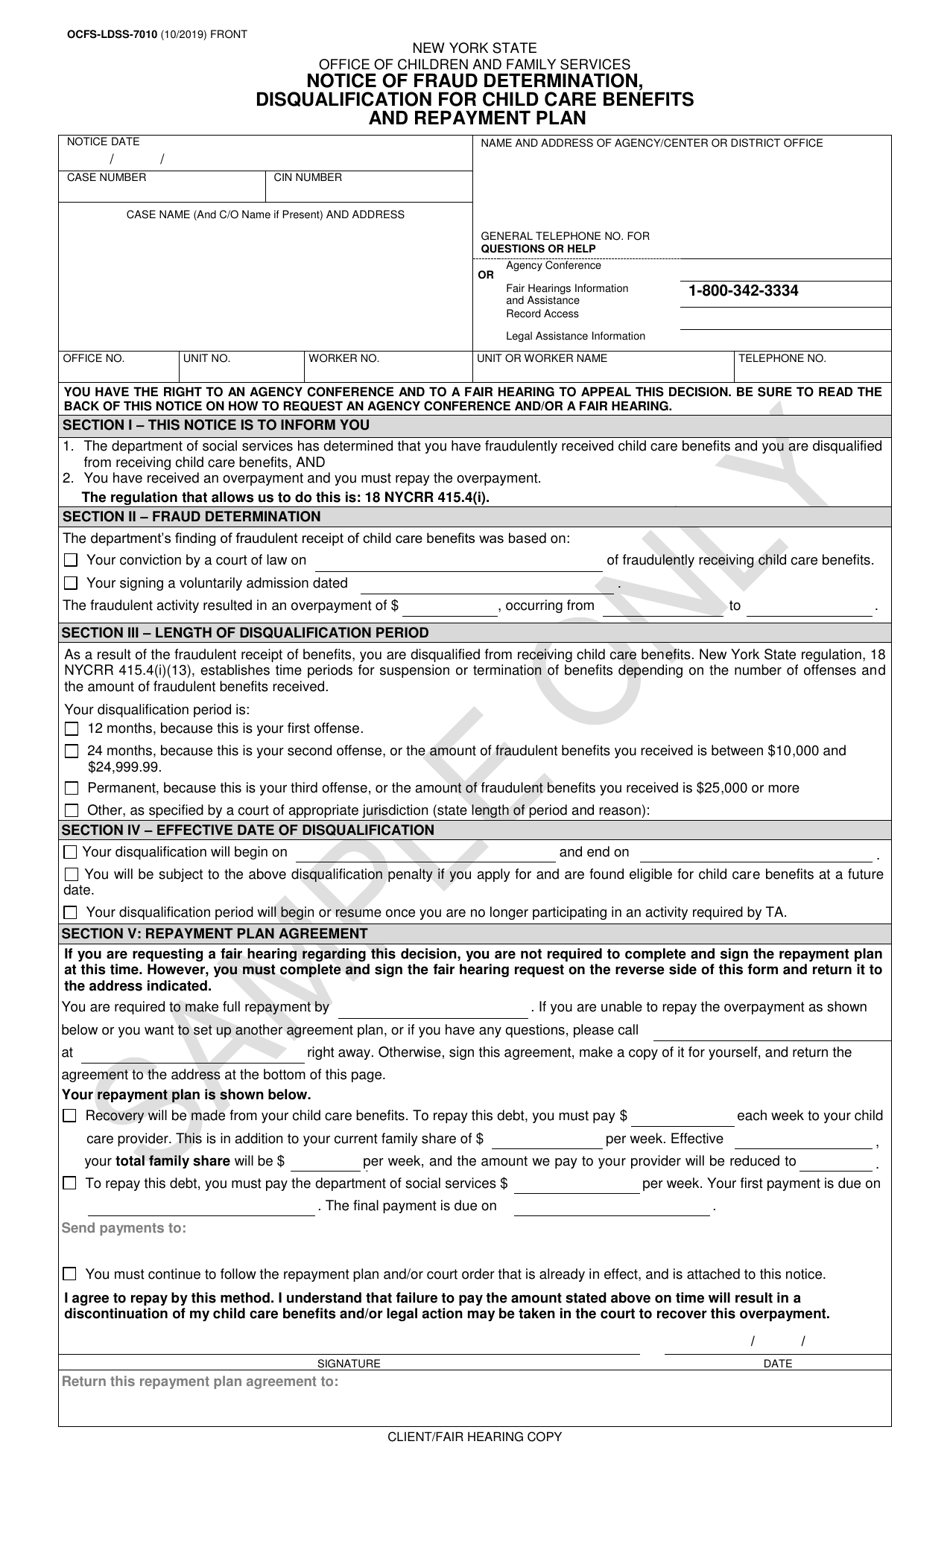 Sample Form OCFS-LDSS-7010 Notice of Fraud Determination, Disqualification for Child Care Benefits and Repayment Plan - New York, Page 1